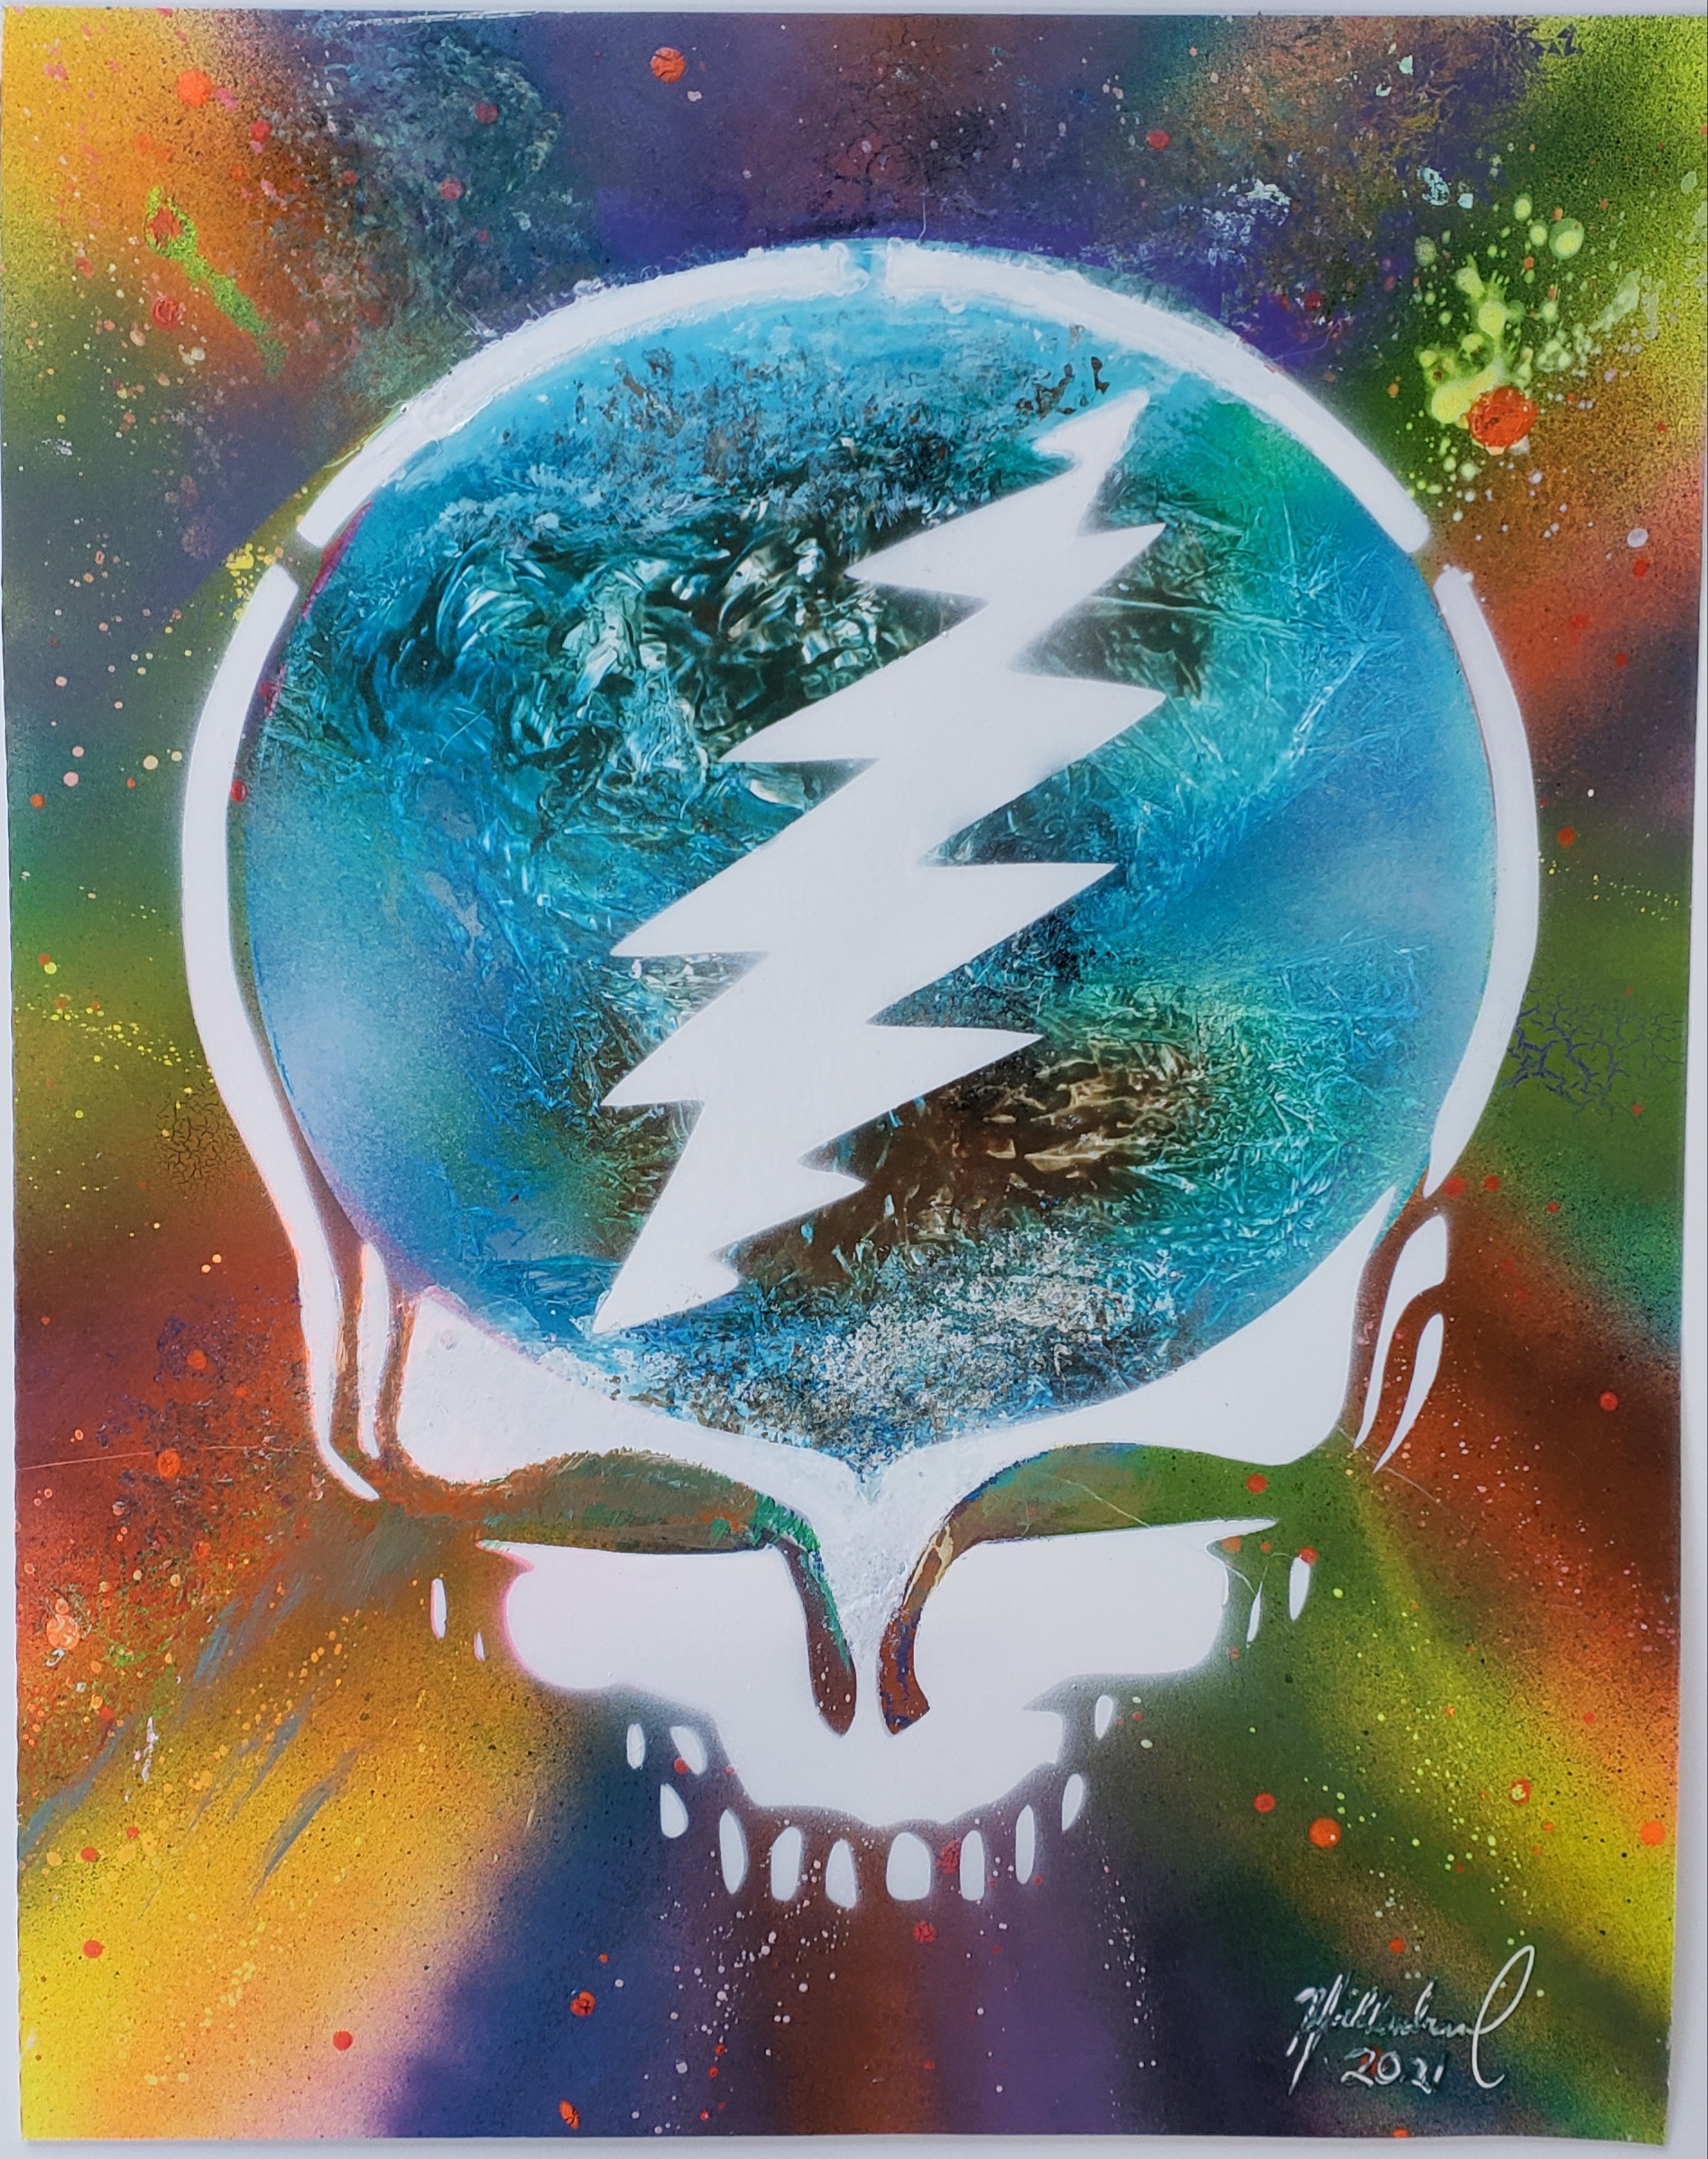 Grateful Dead - Steal Your Face (commissioned work)